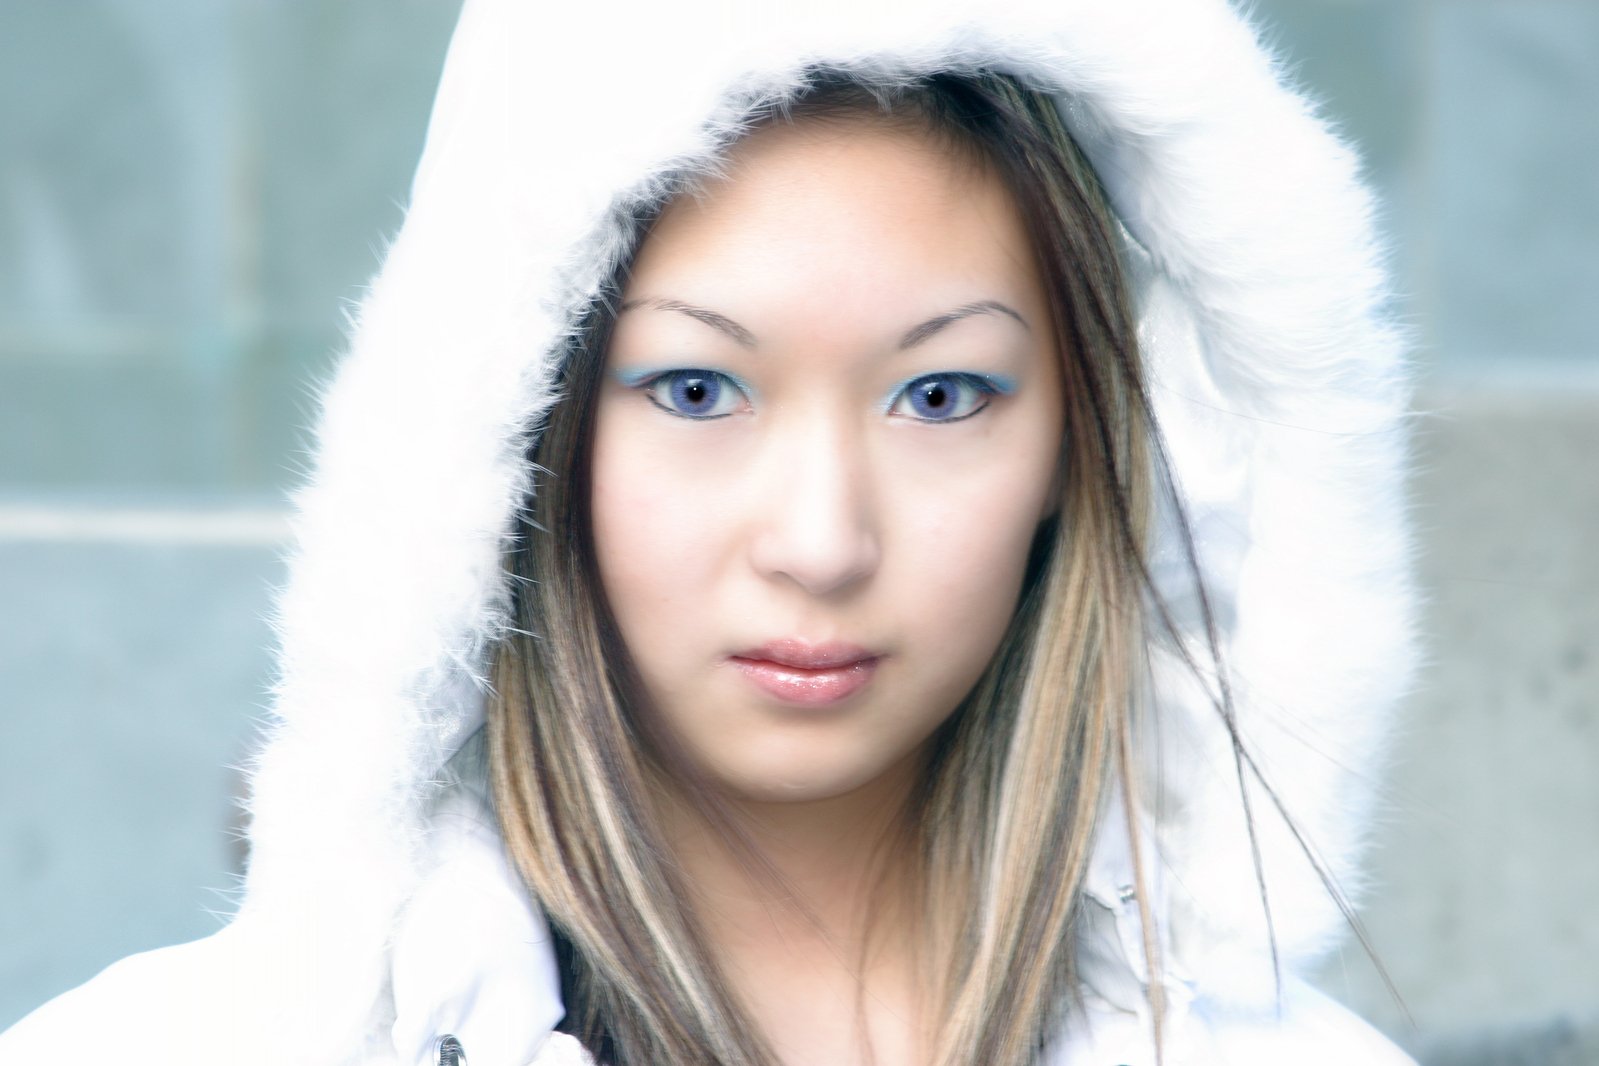 the young woman is wearing a white fur hoodie